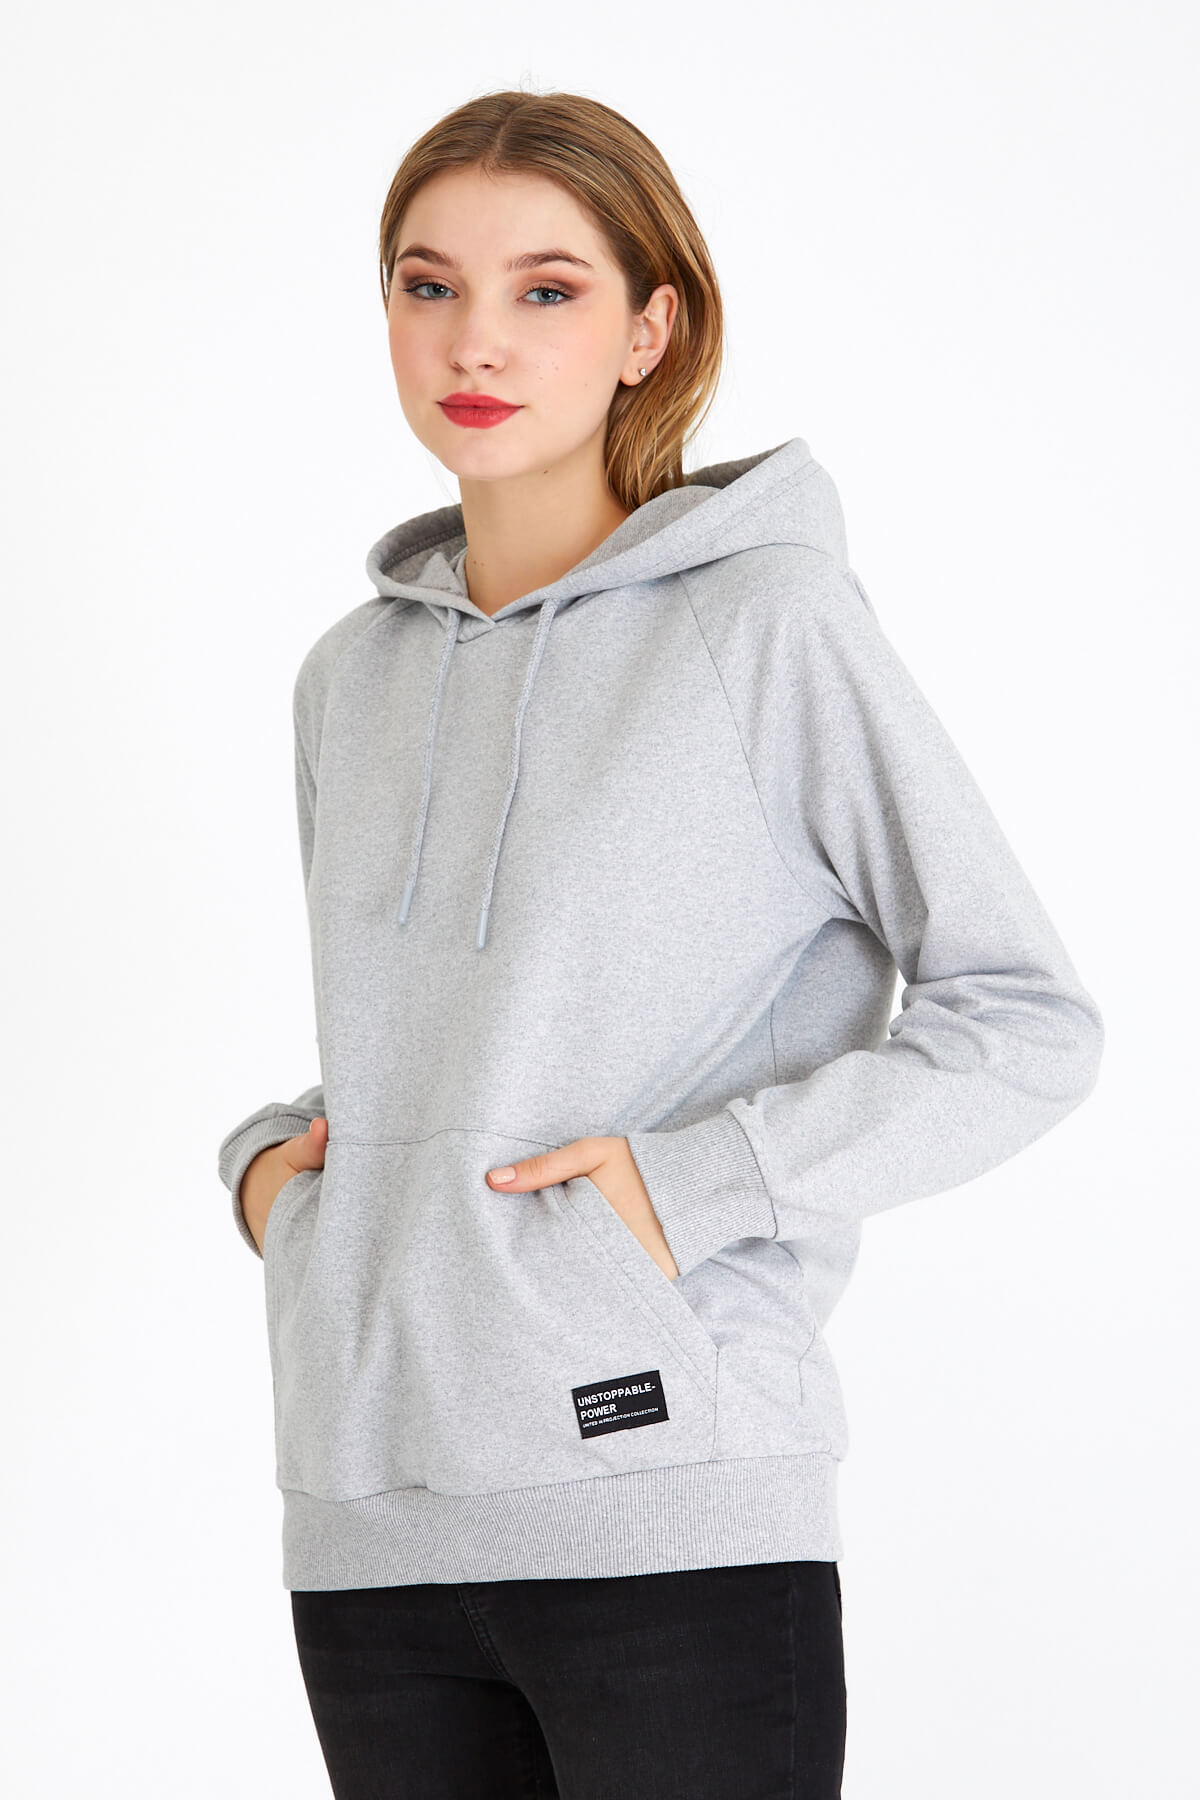 hoodie (12) - ByComeor - Wholesale Products